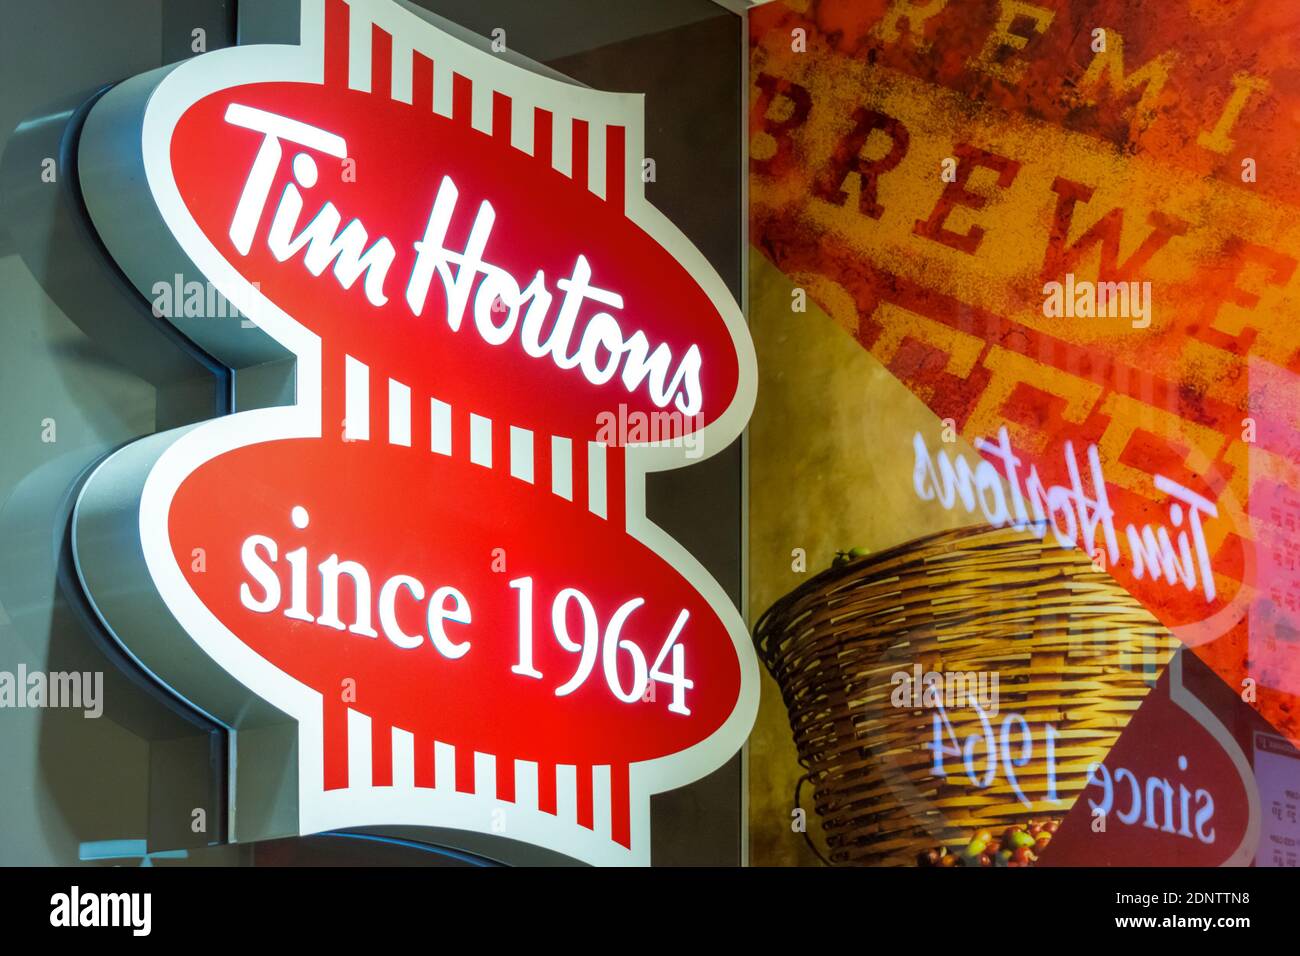 Tim Hortons sign in a restaurant, Toronto, Canada Stock Photo